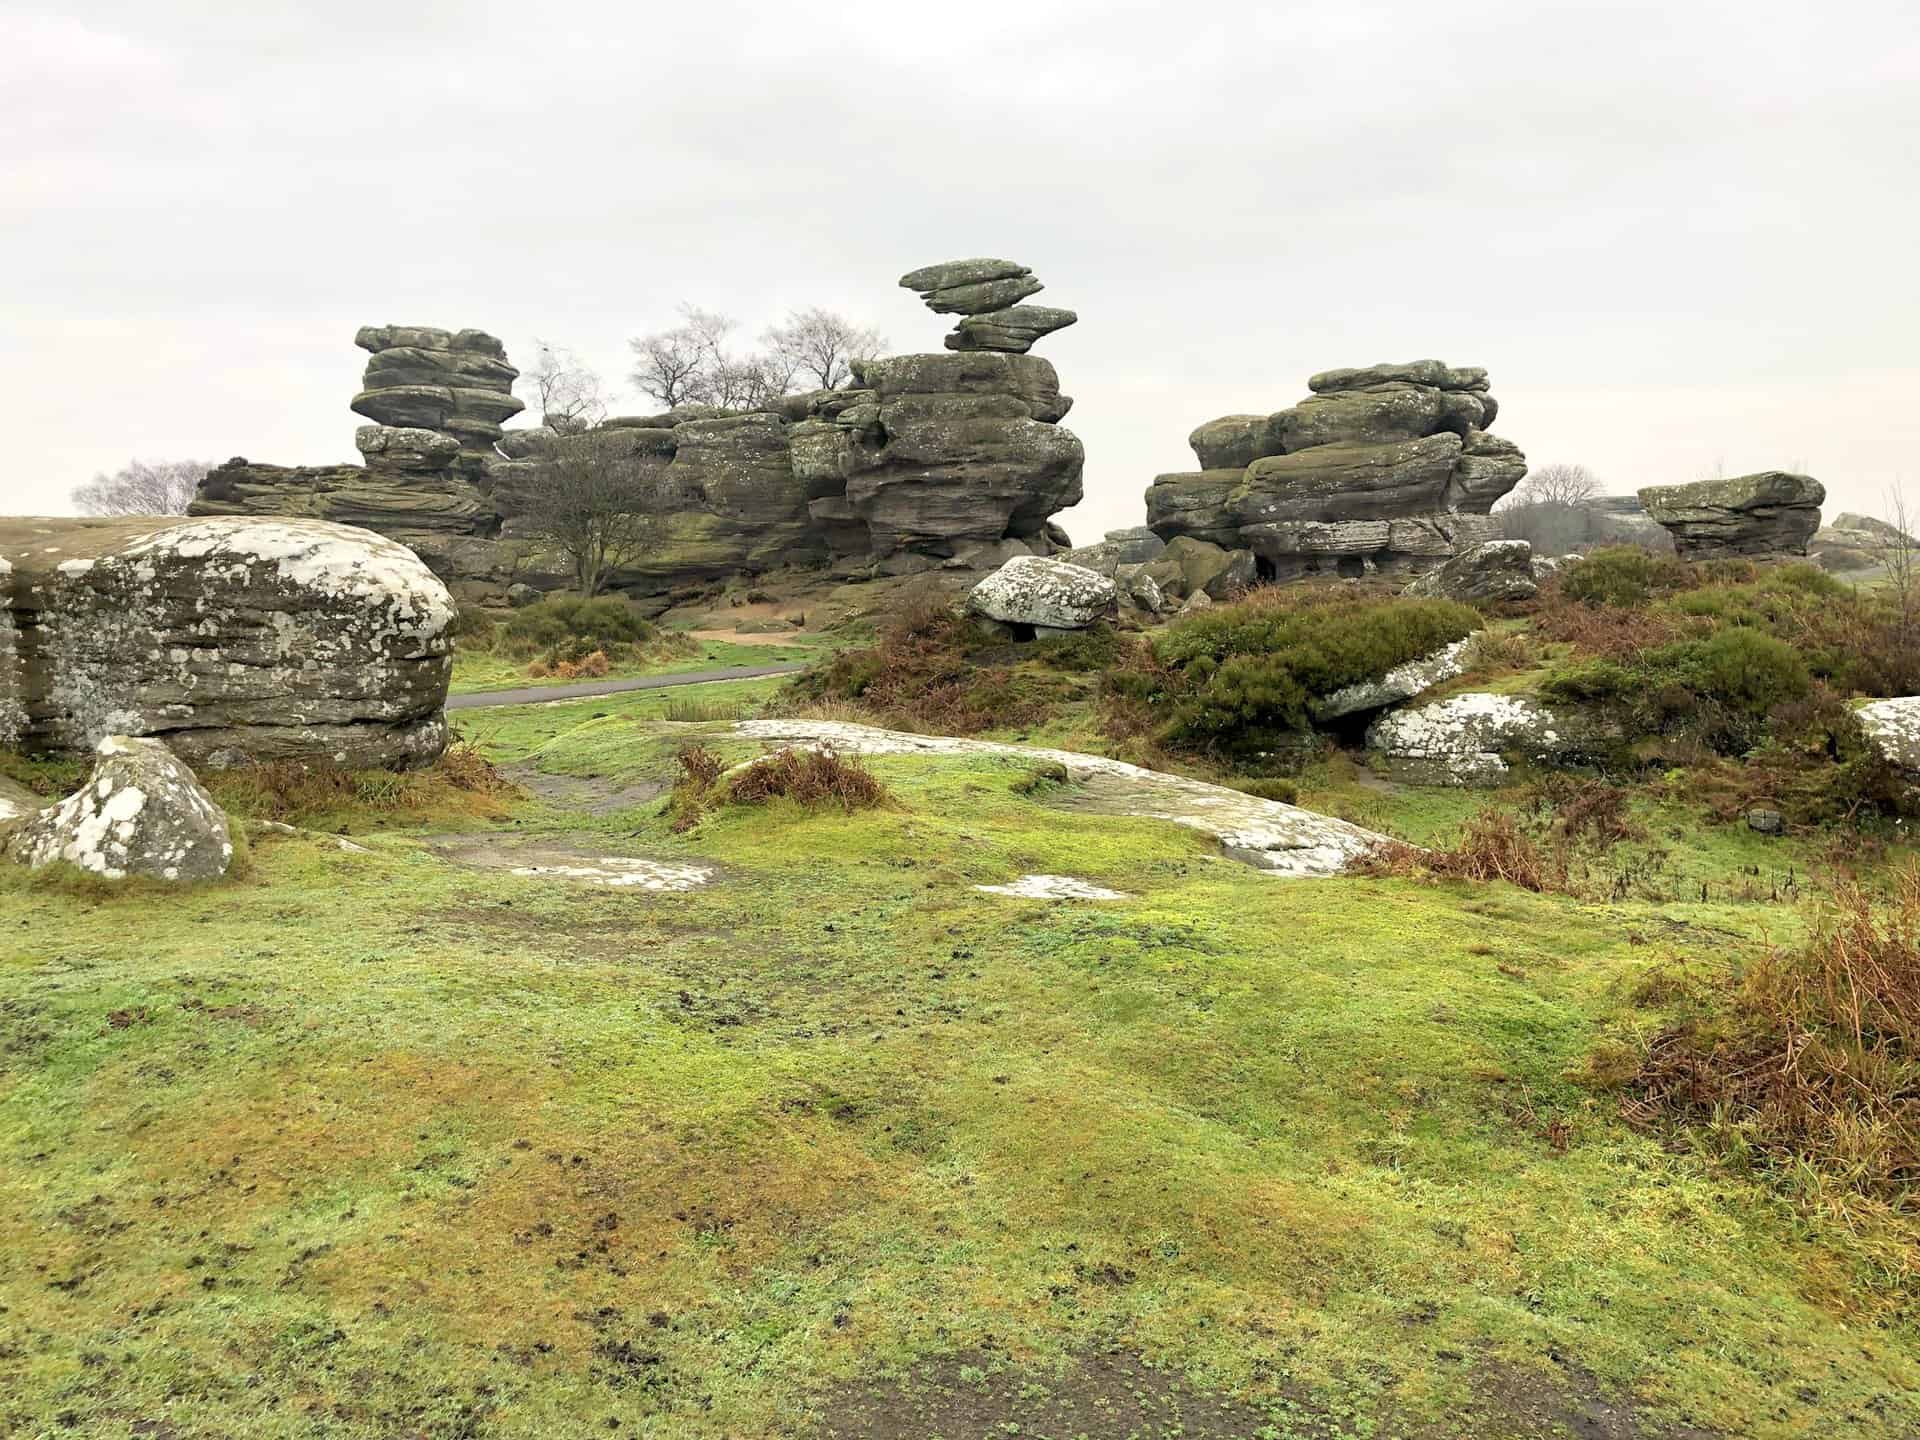 Brimham Rocks in North Yorkshire, notable for their balancing rock formations, standing at nearly 30 feet and situated within the Nidderdale Area of Outstanding Natural Beauty. This is about halfway round this particular Brimham Rocks walk.